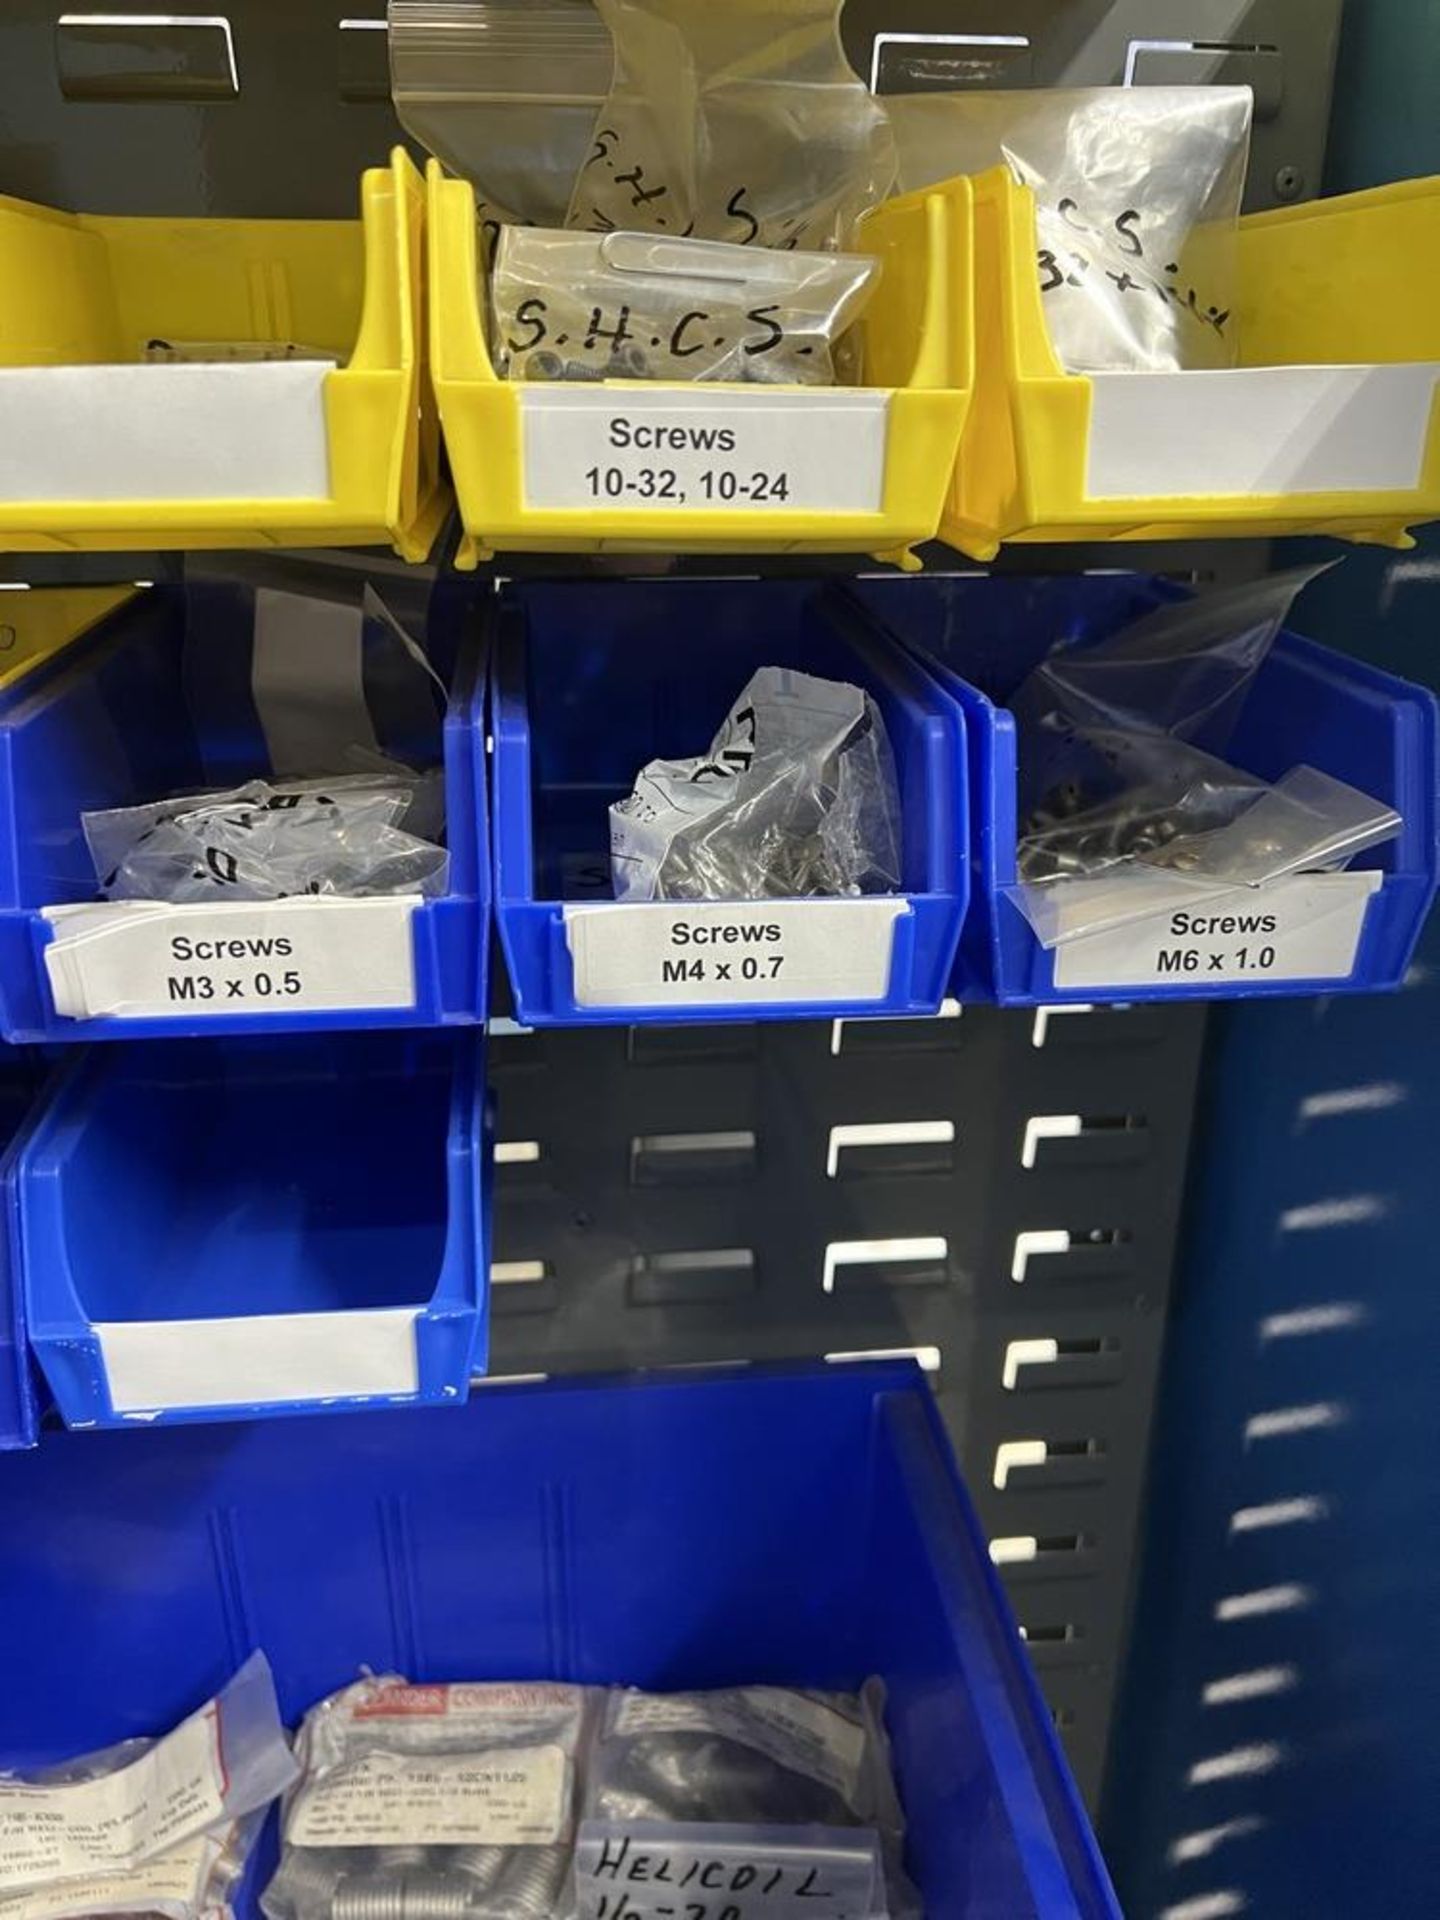 Large Bin Organizer Full of Various Size Helicoils, Dowel Pins, Heicoil Installation Tools, - Image 6 of 13